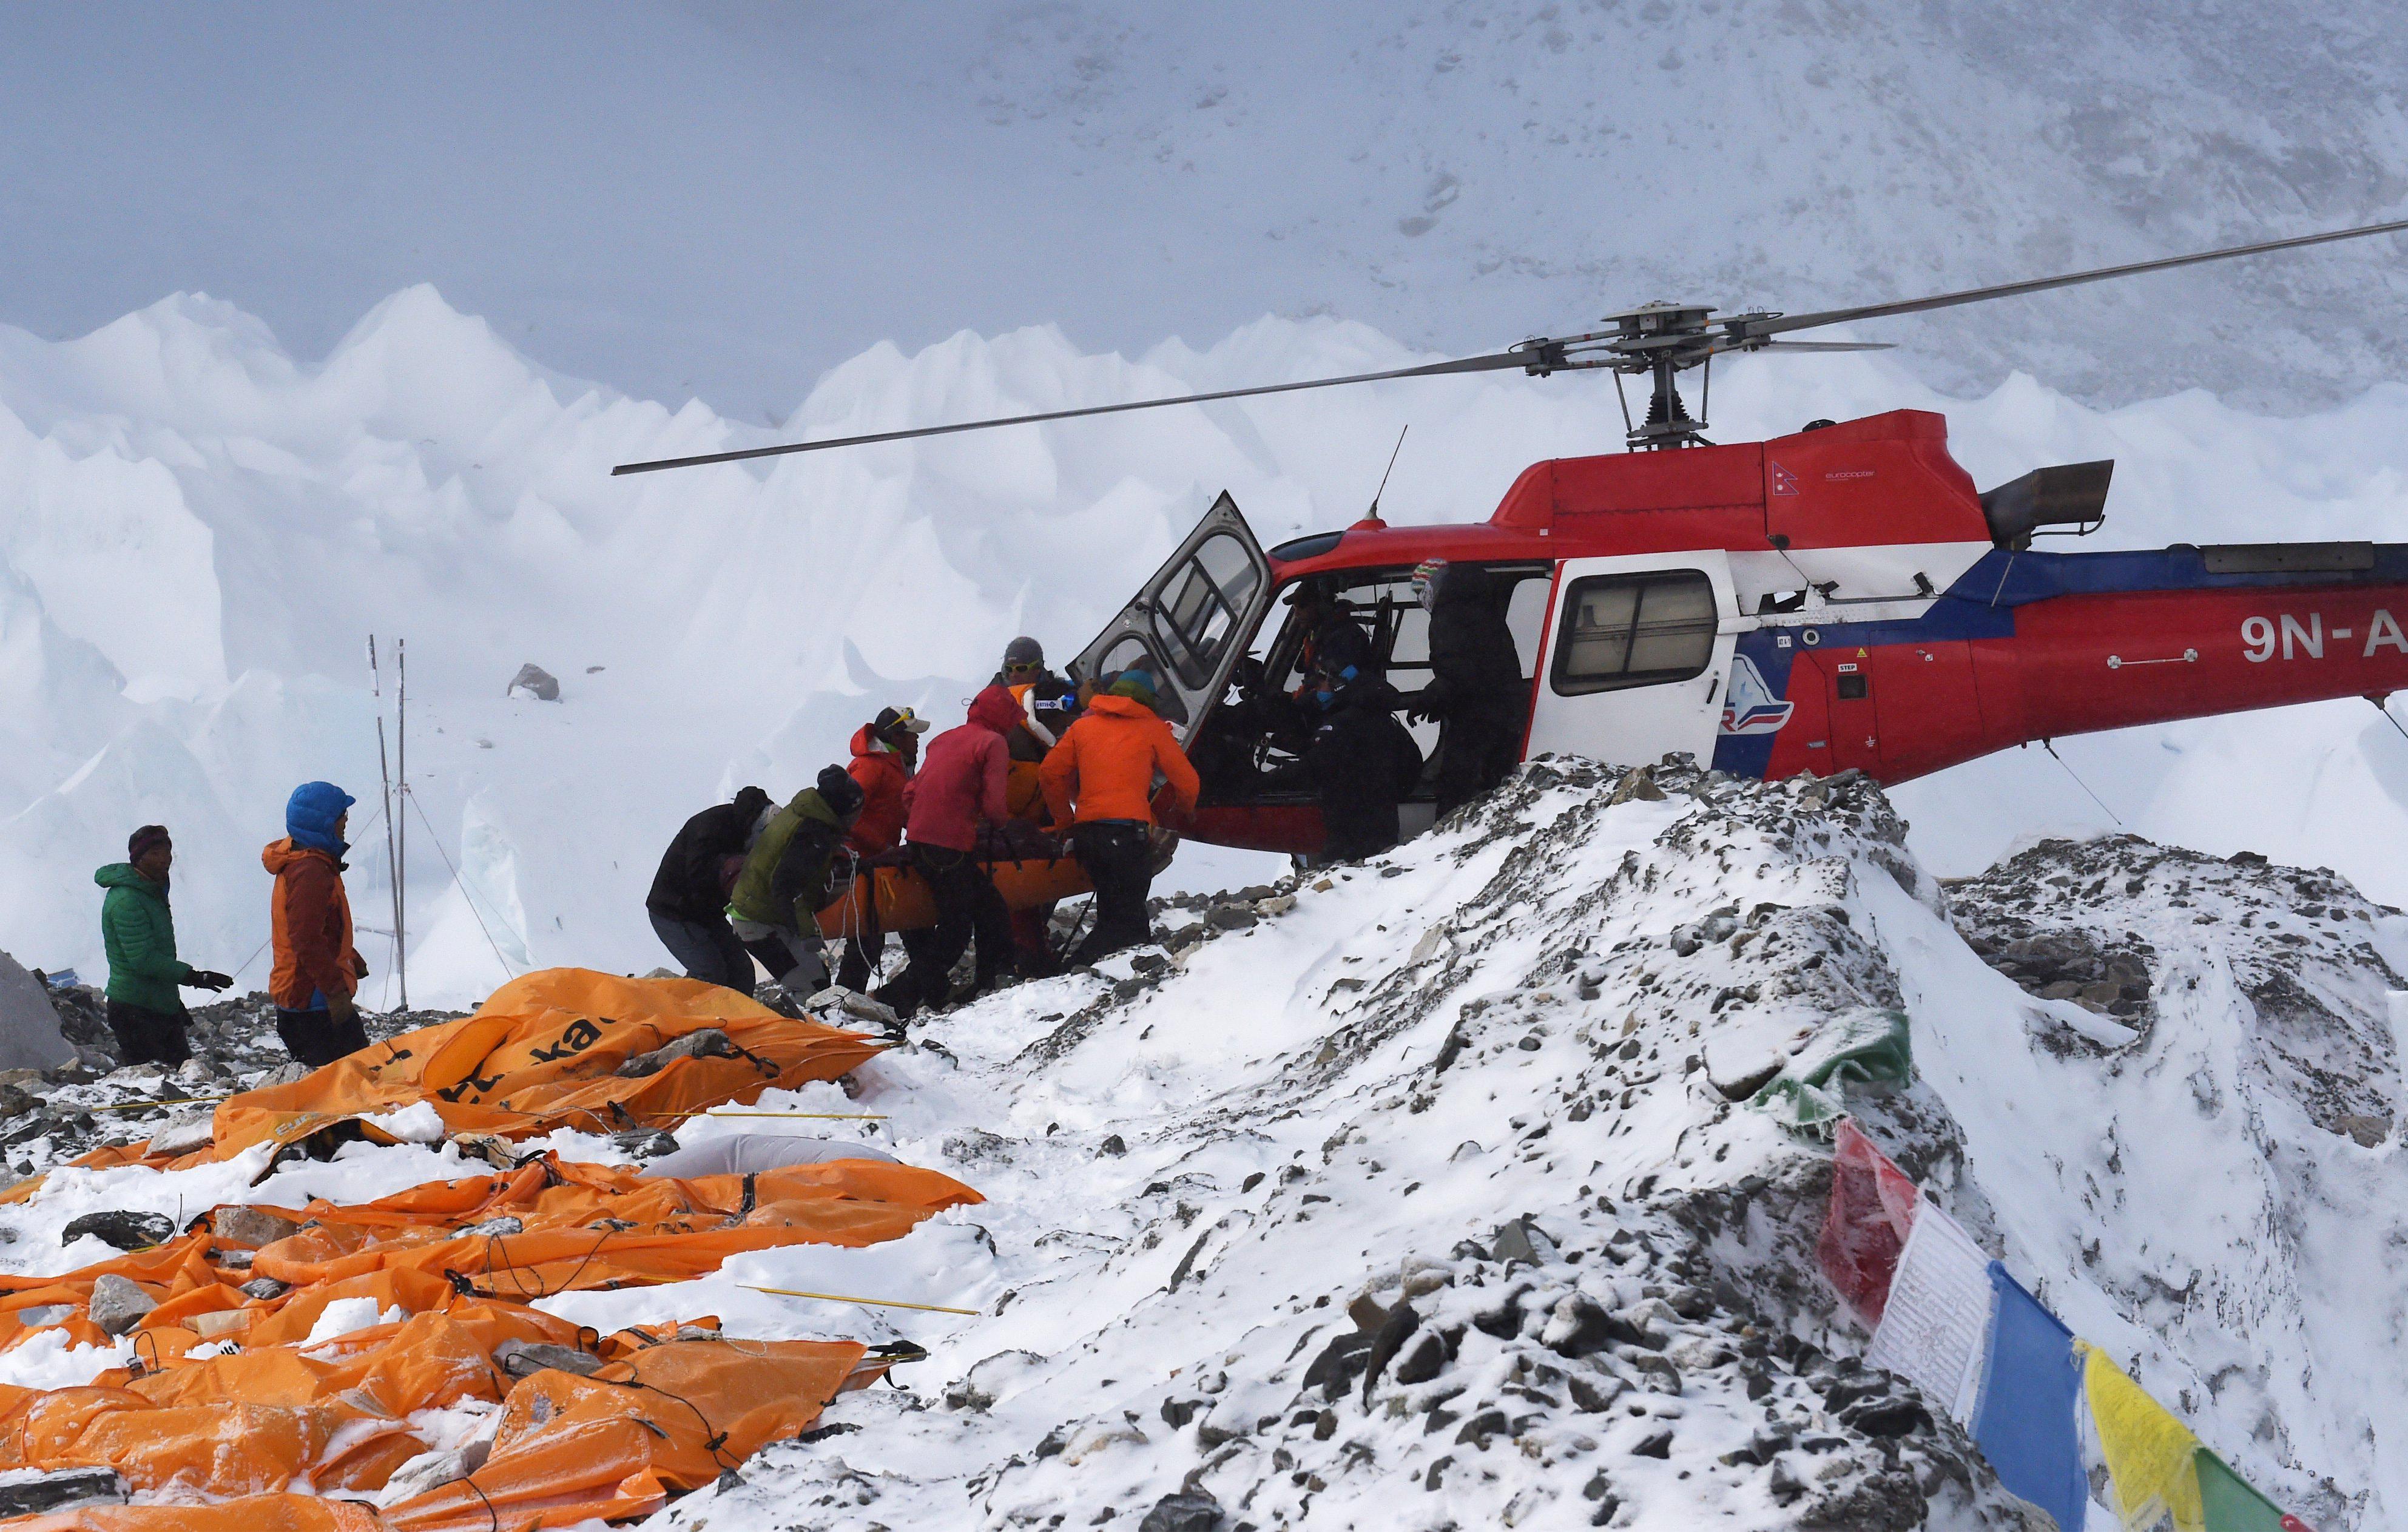 An injured person is loaded onto a rescue helicopter at Everest Base Camp on April 26, 2015, a day after an avalanche triggered by an earthquake devastated the camp. Rescuers in Nepal are searching frantically for survivors of a huge quake on April 25, that killed nearly 2,000, digging through rubble in the devastated capital Kathmandu and airlifting victims of an avalanche at Everest base Camp. The bodies of those who perished lie under orange tents. AFP PHOTO/ROBERTO SCHMIDT